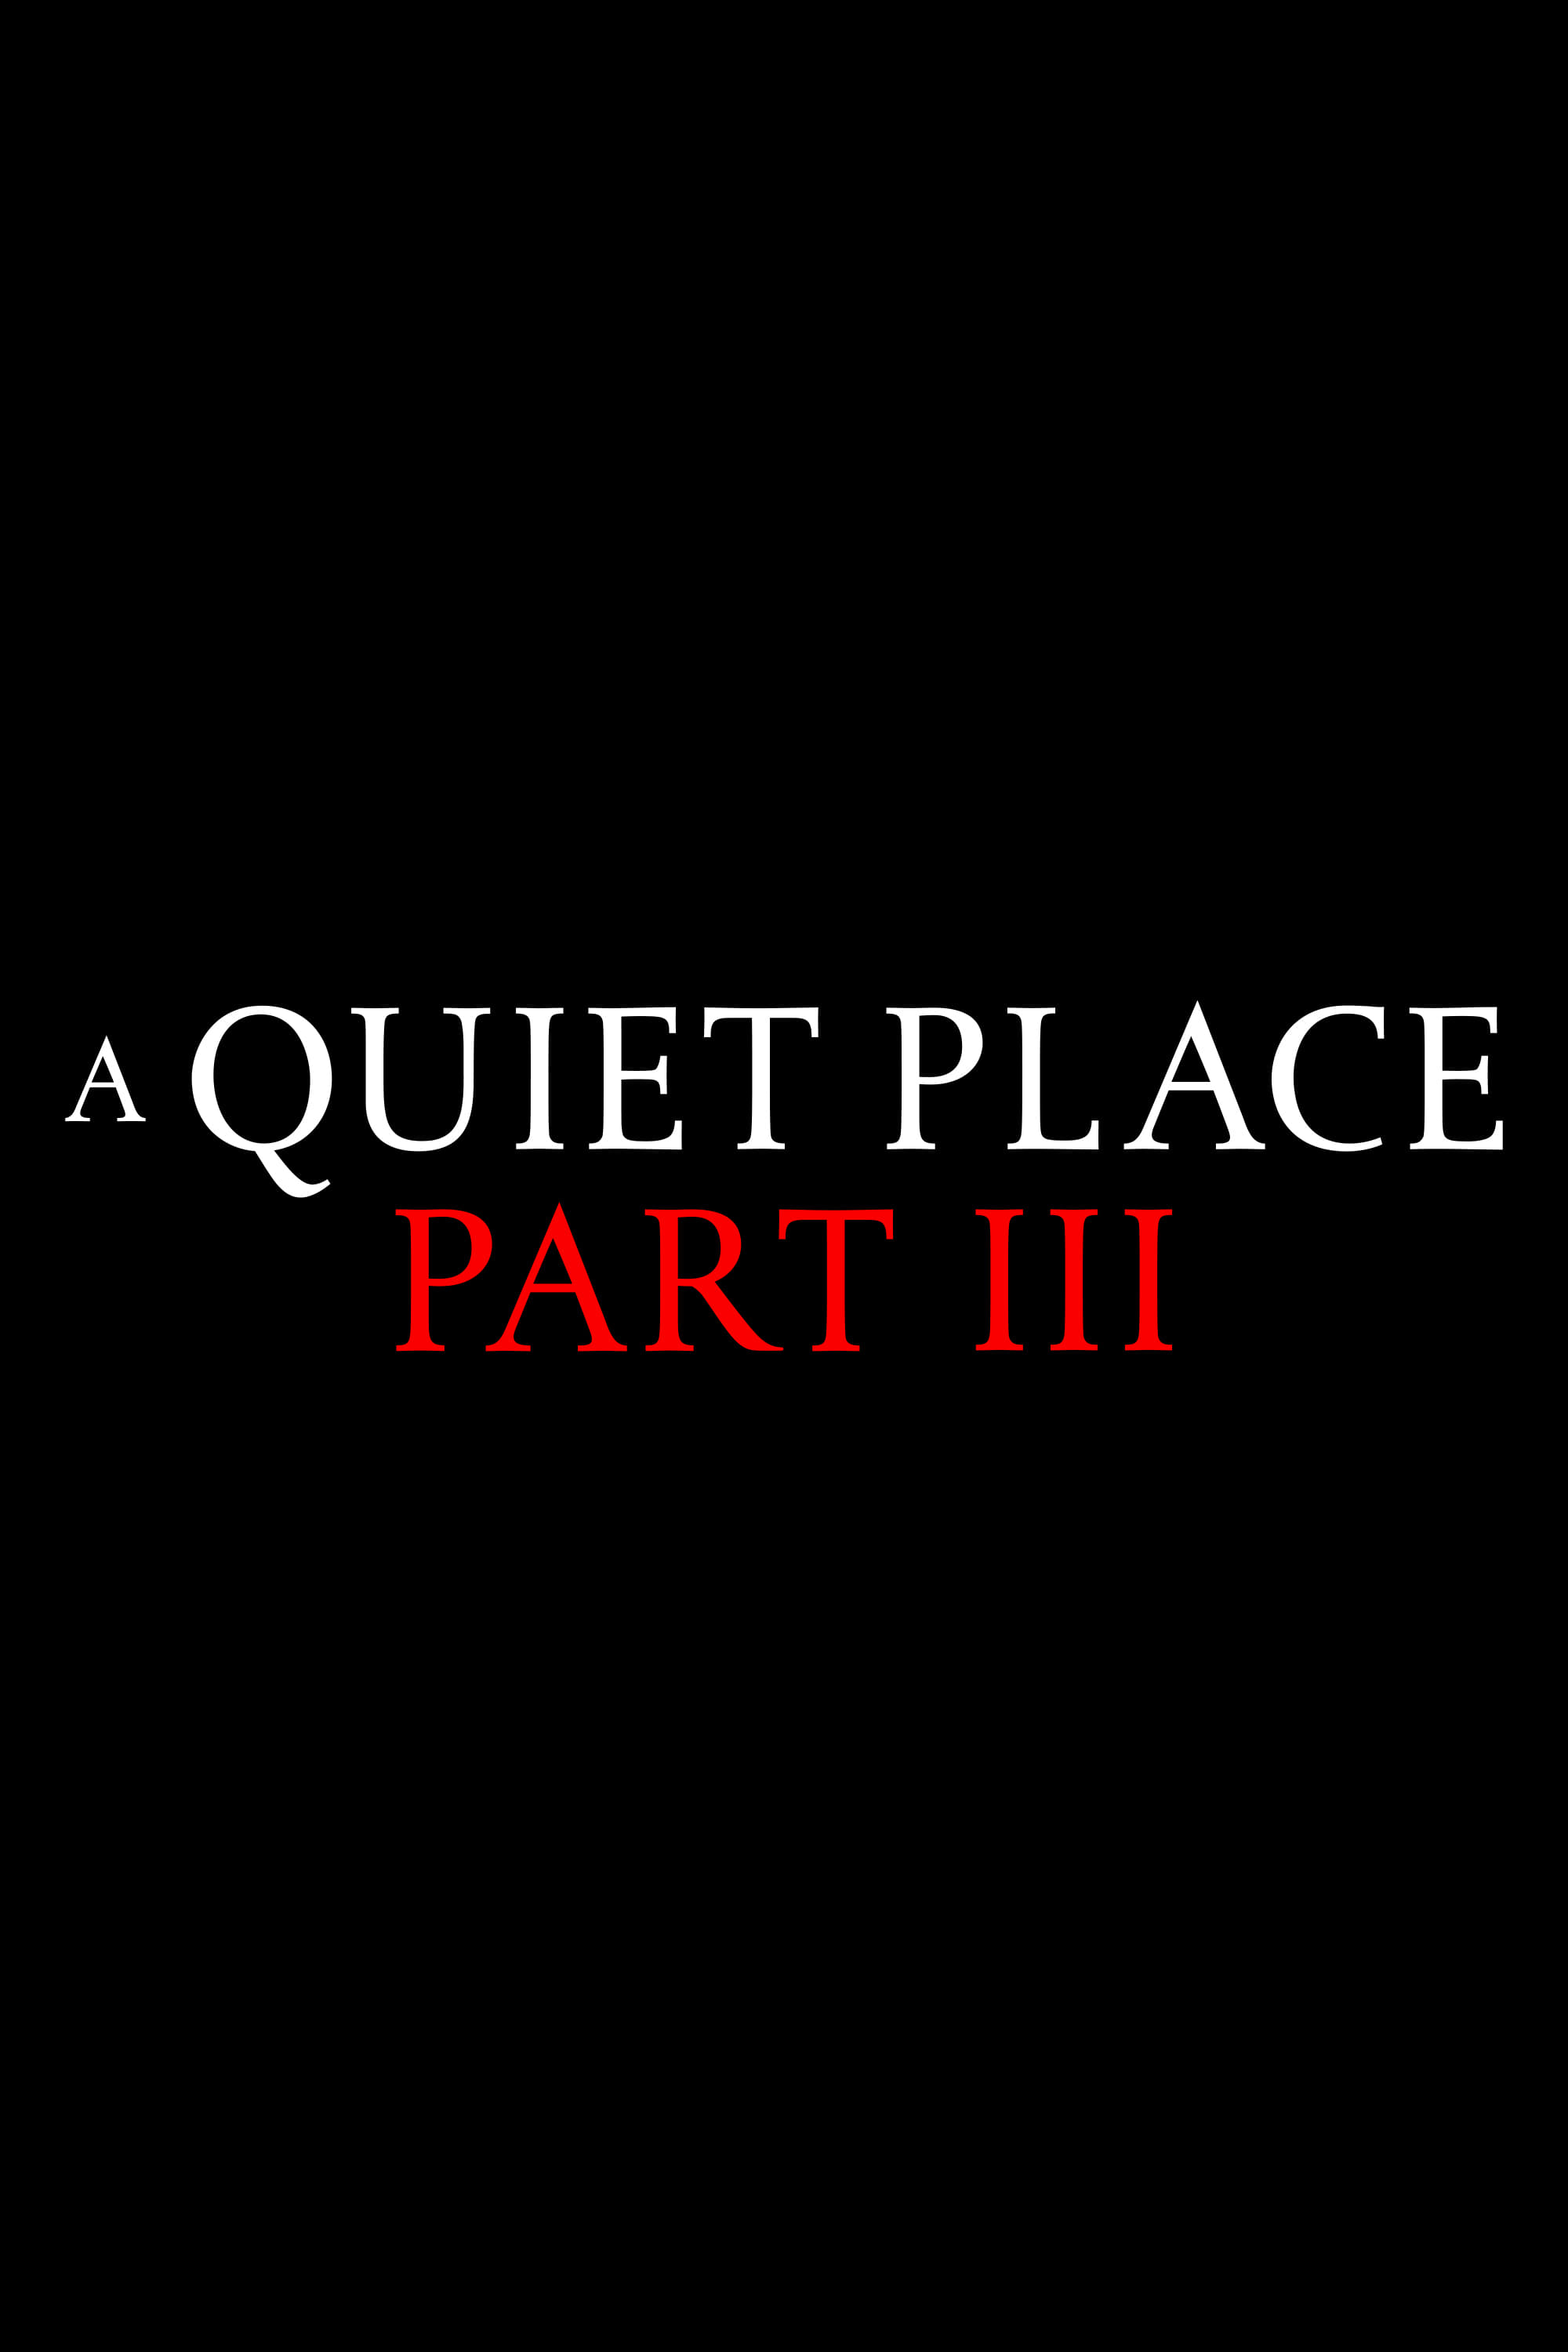 A Quiet Place Part III film